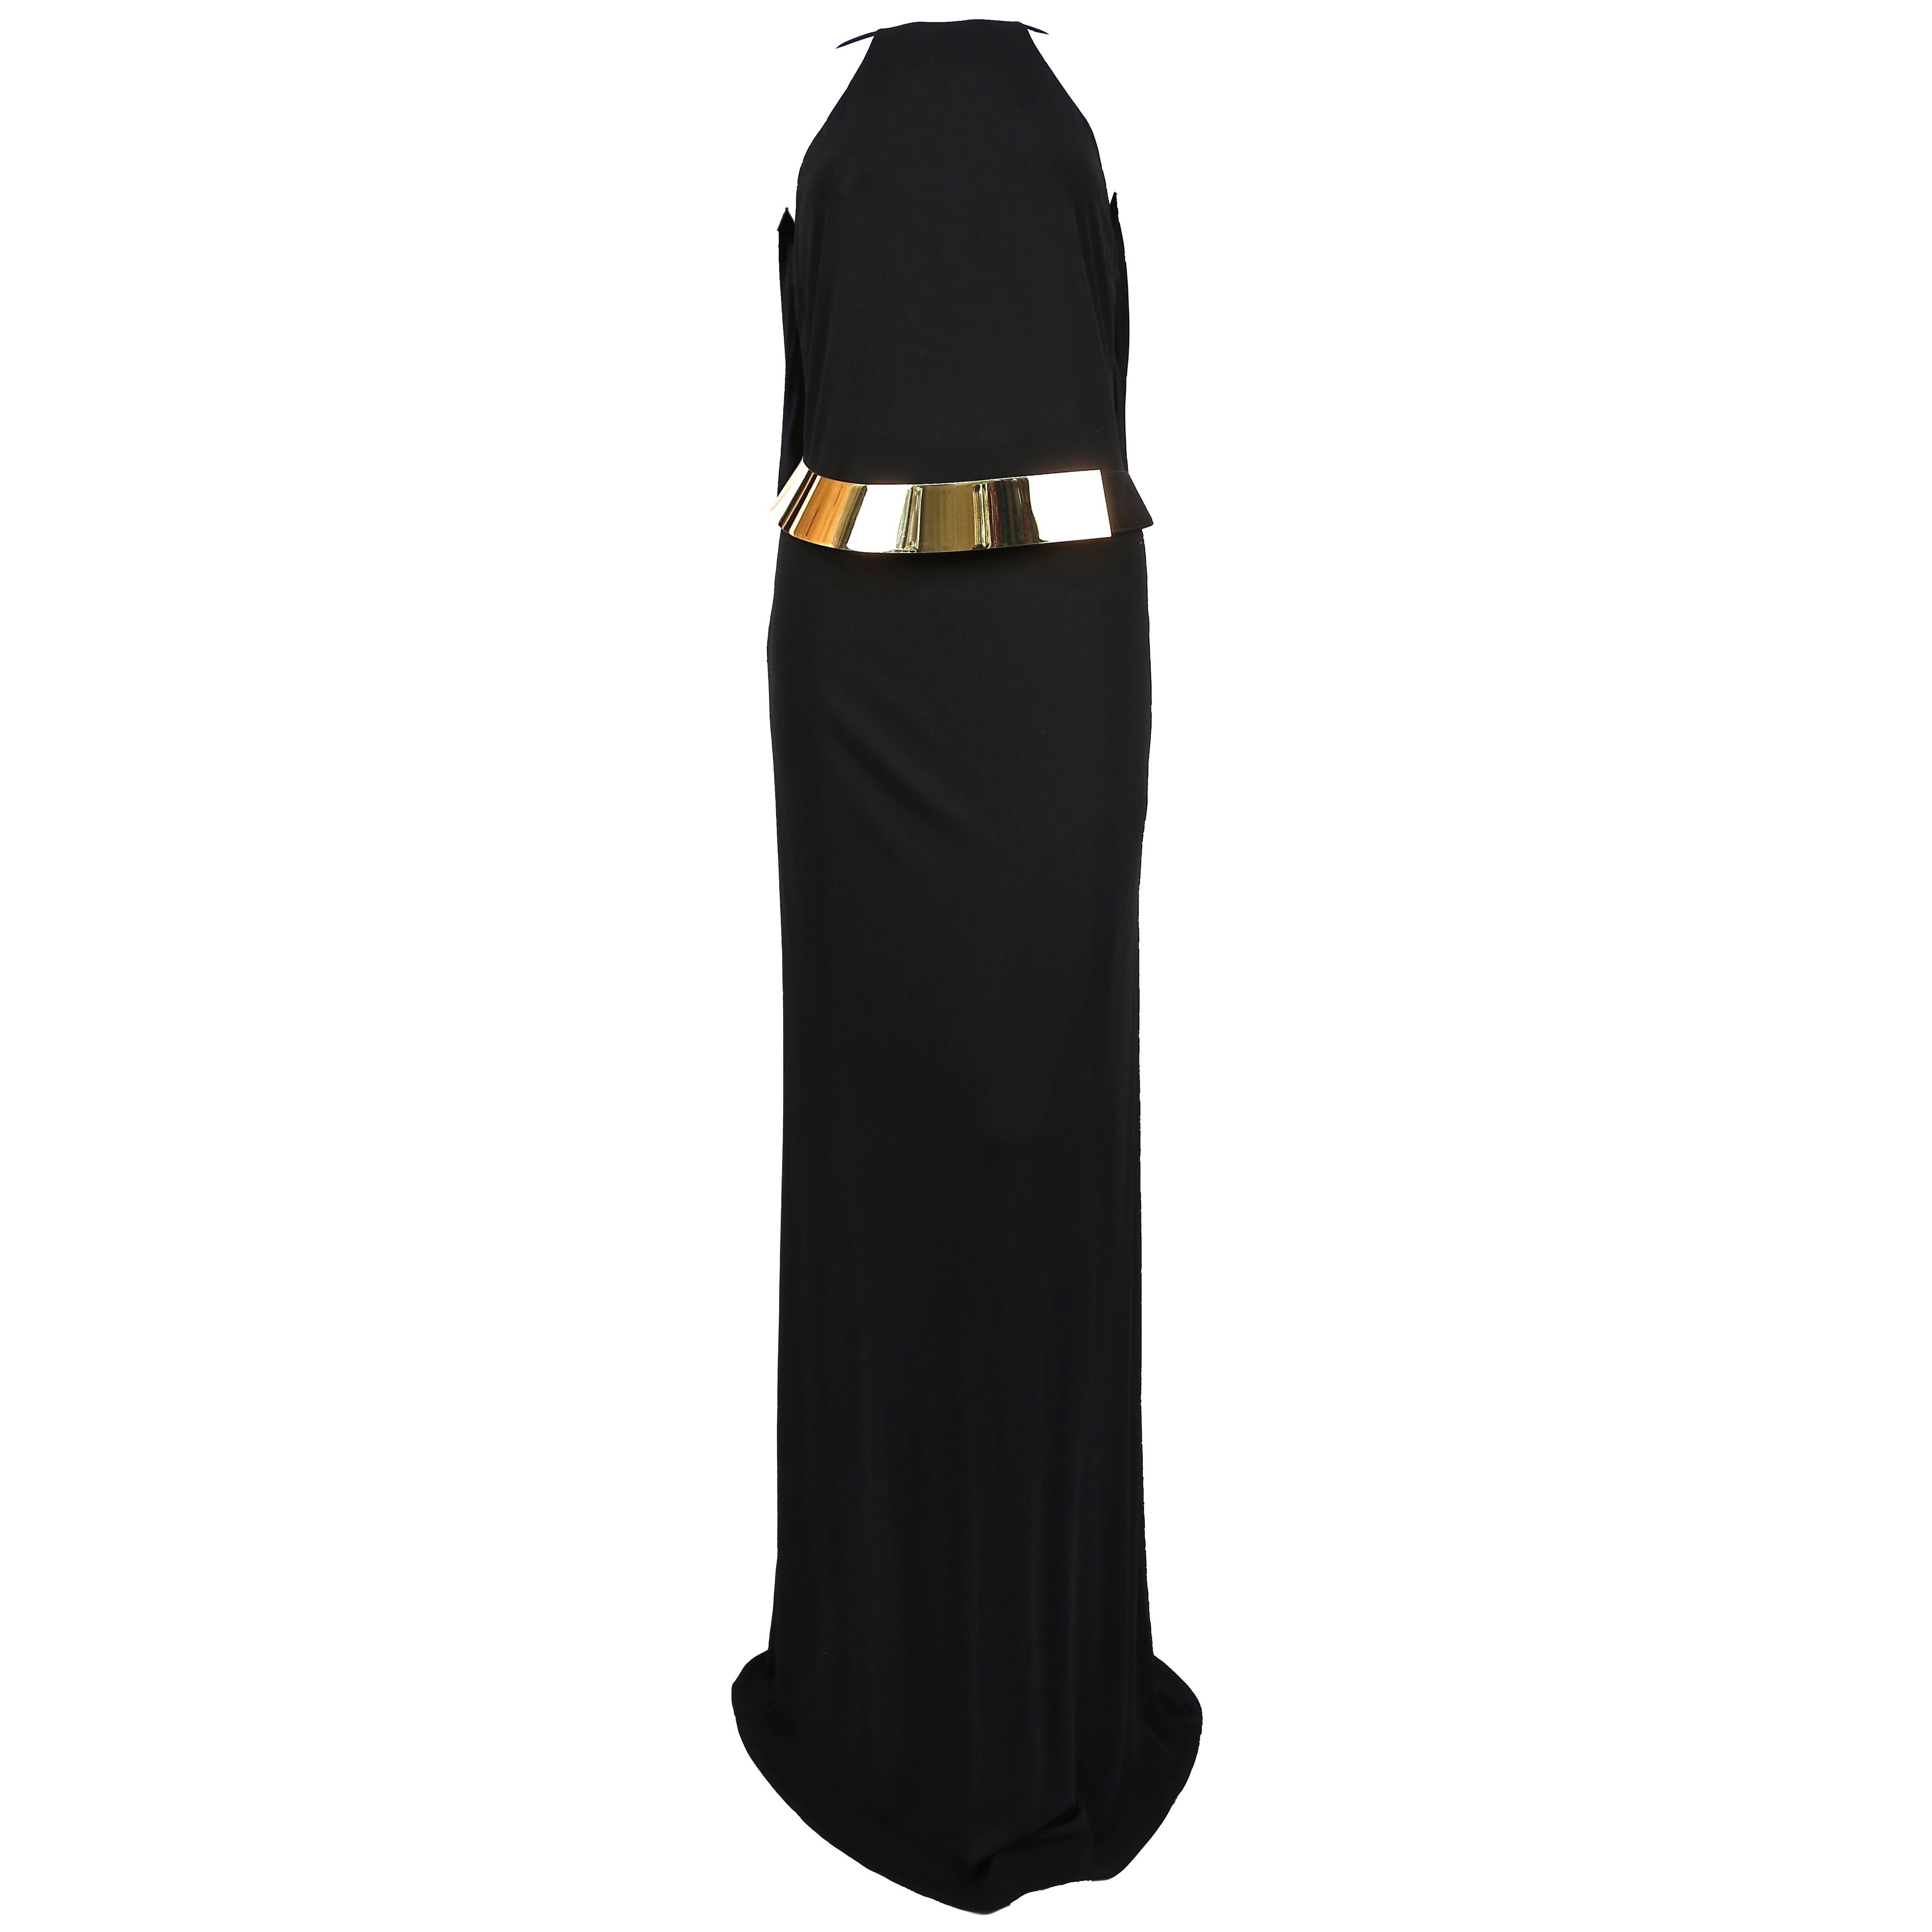 Tom Ford for Gucci black jersey gown with gold belt buckle, 1996 